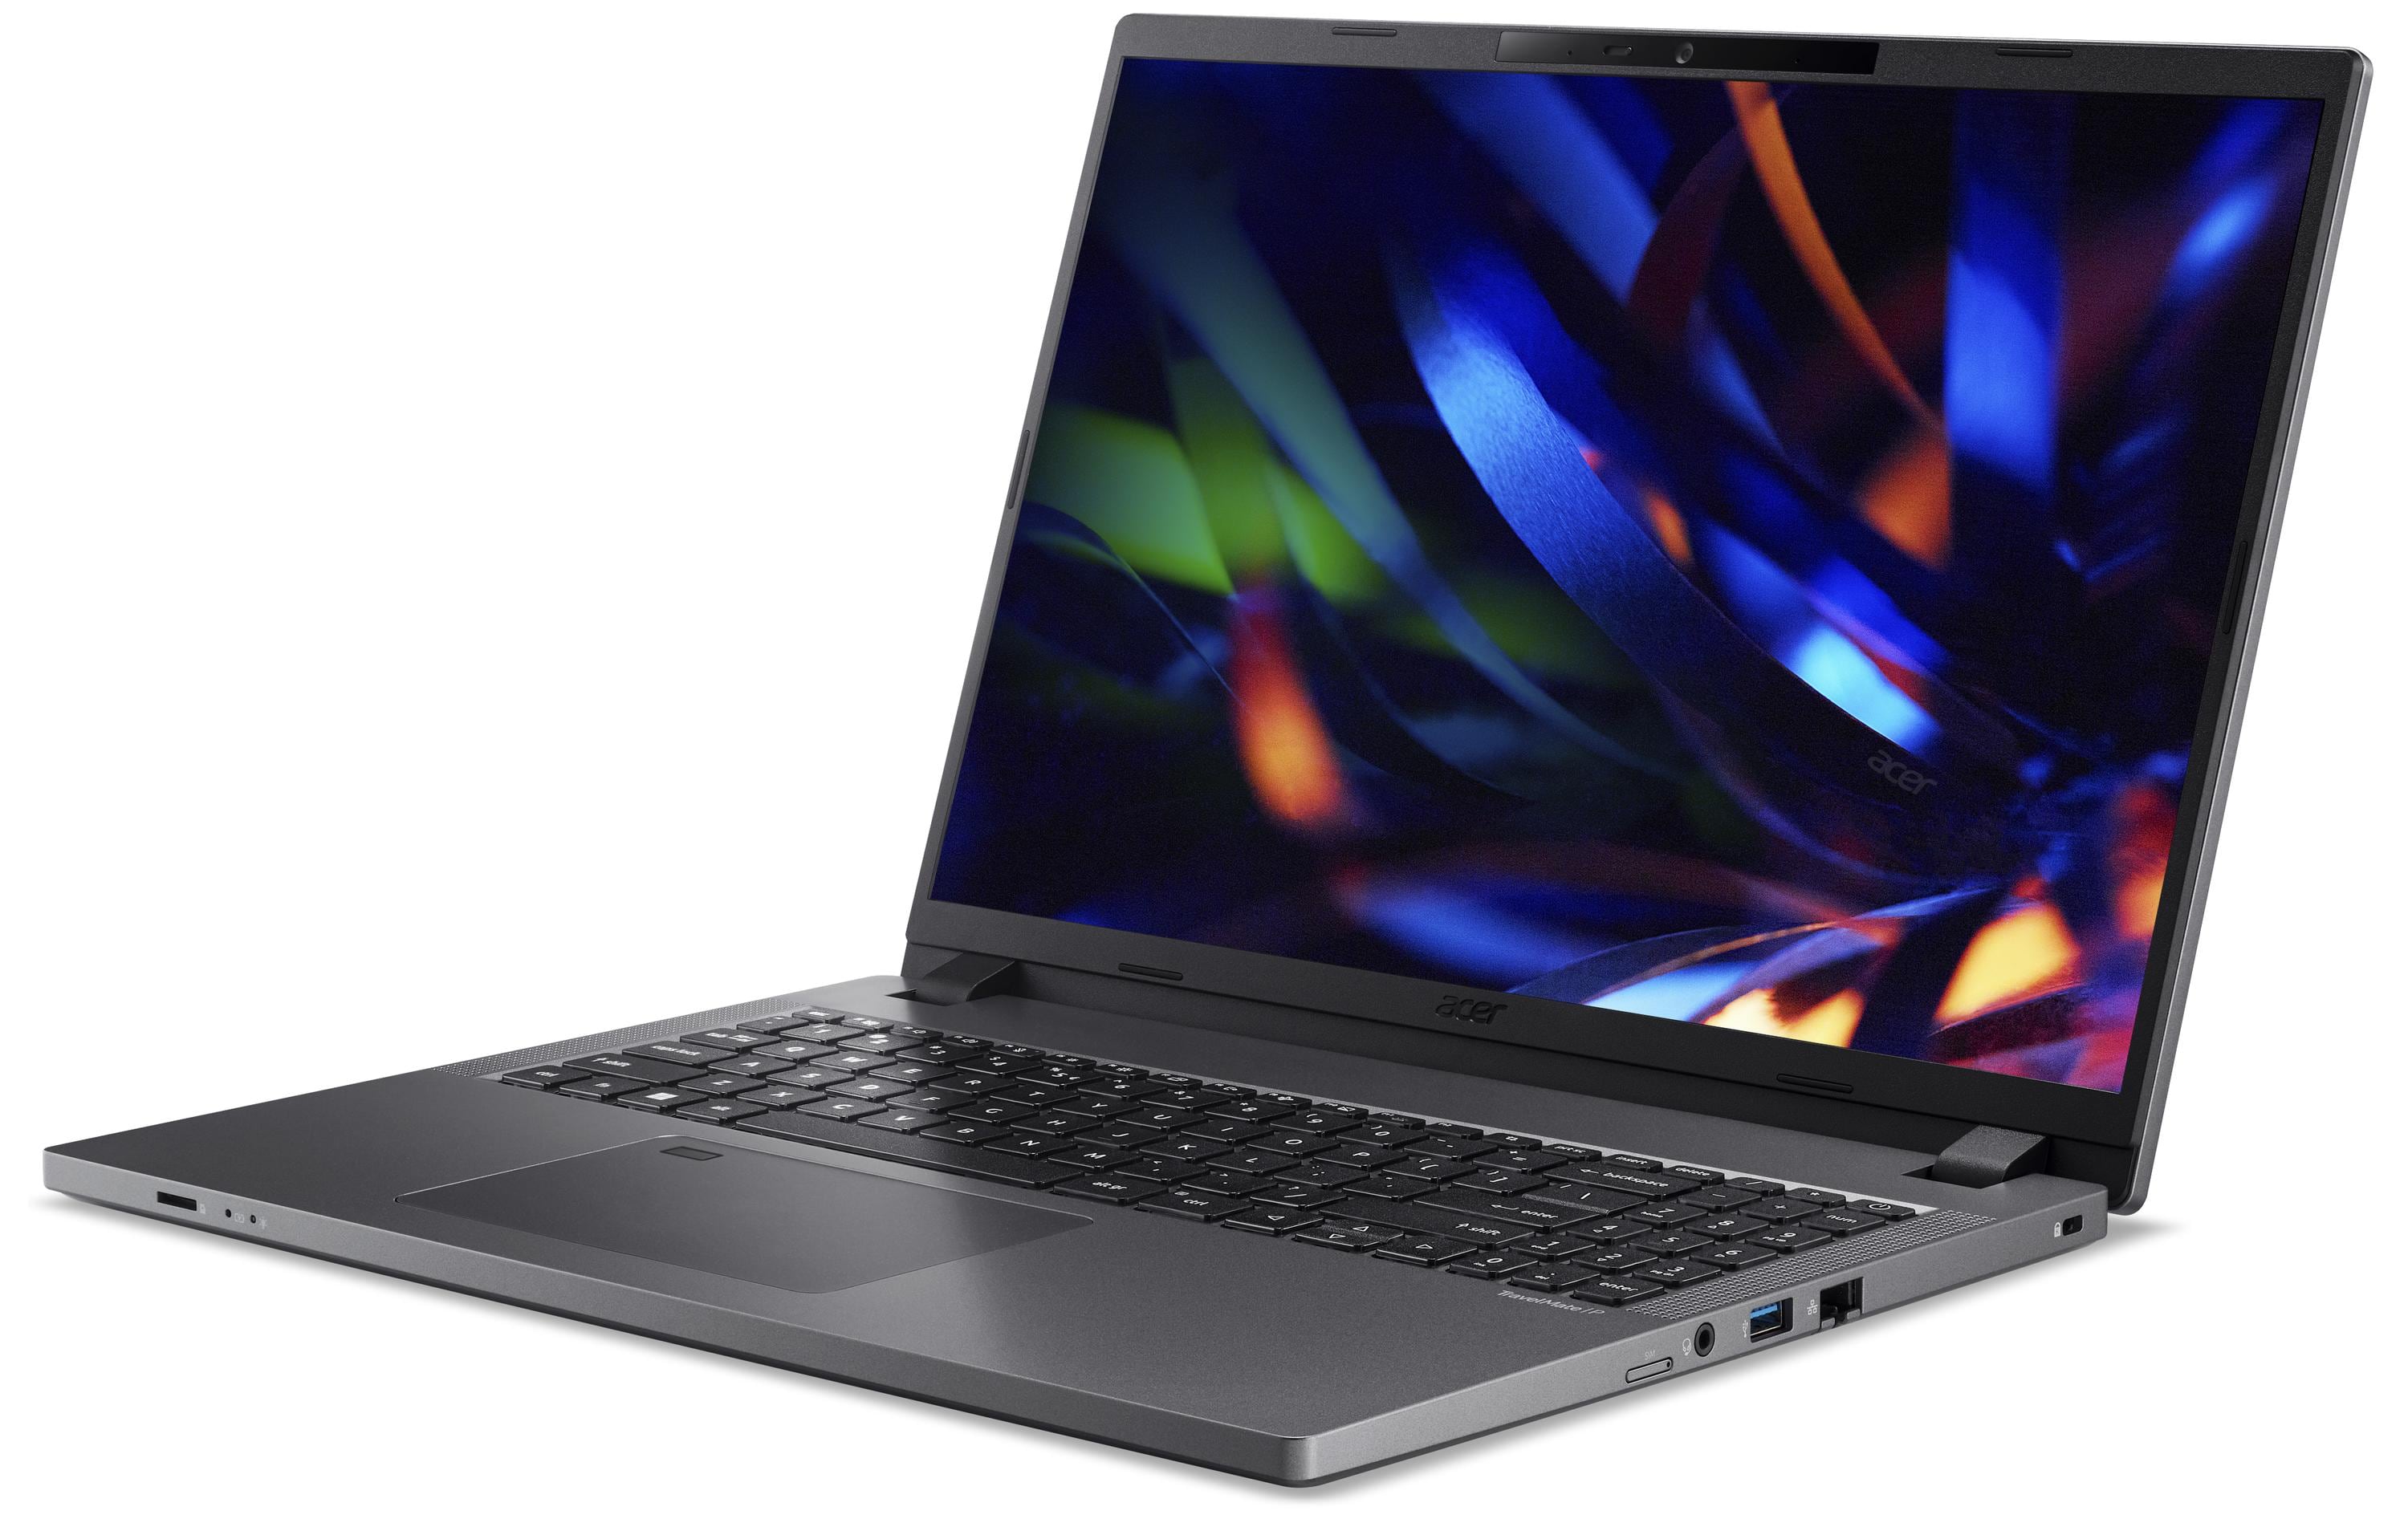 Acer Business-Notebook »TravelMate P2 TMP216«, 40,48 cm, / 16 Zoll, Intel, Core i5, Iris Xe Graphics, 512 GB SSD